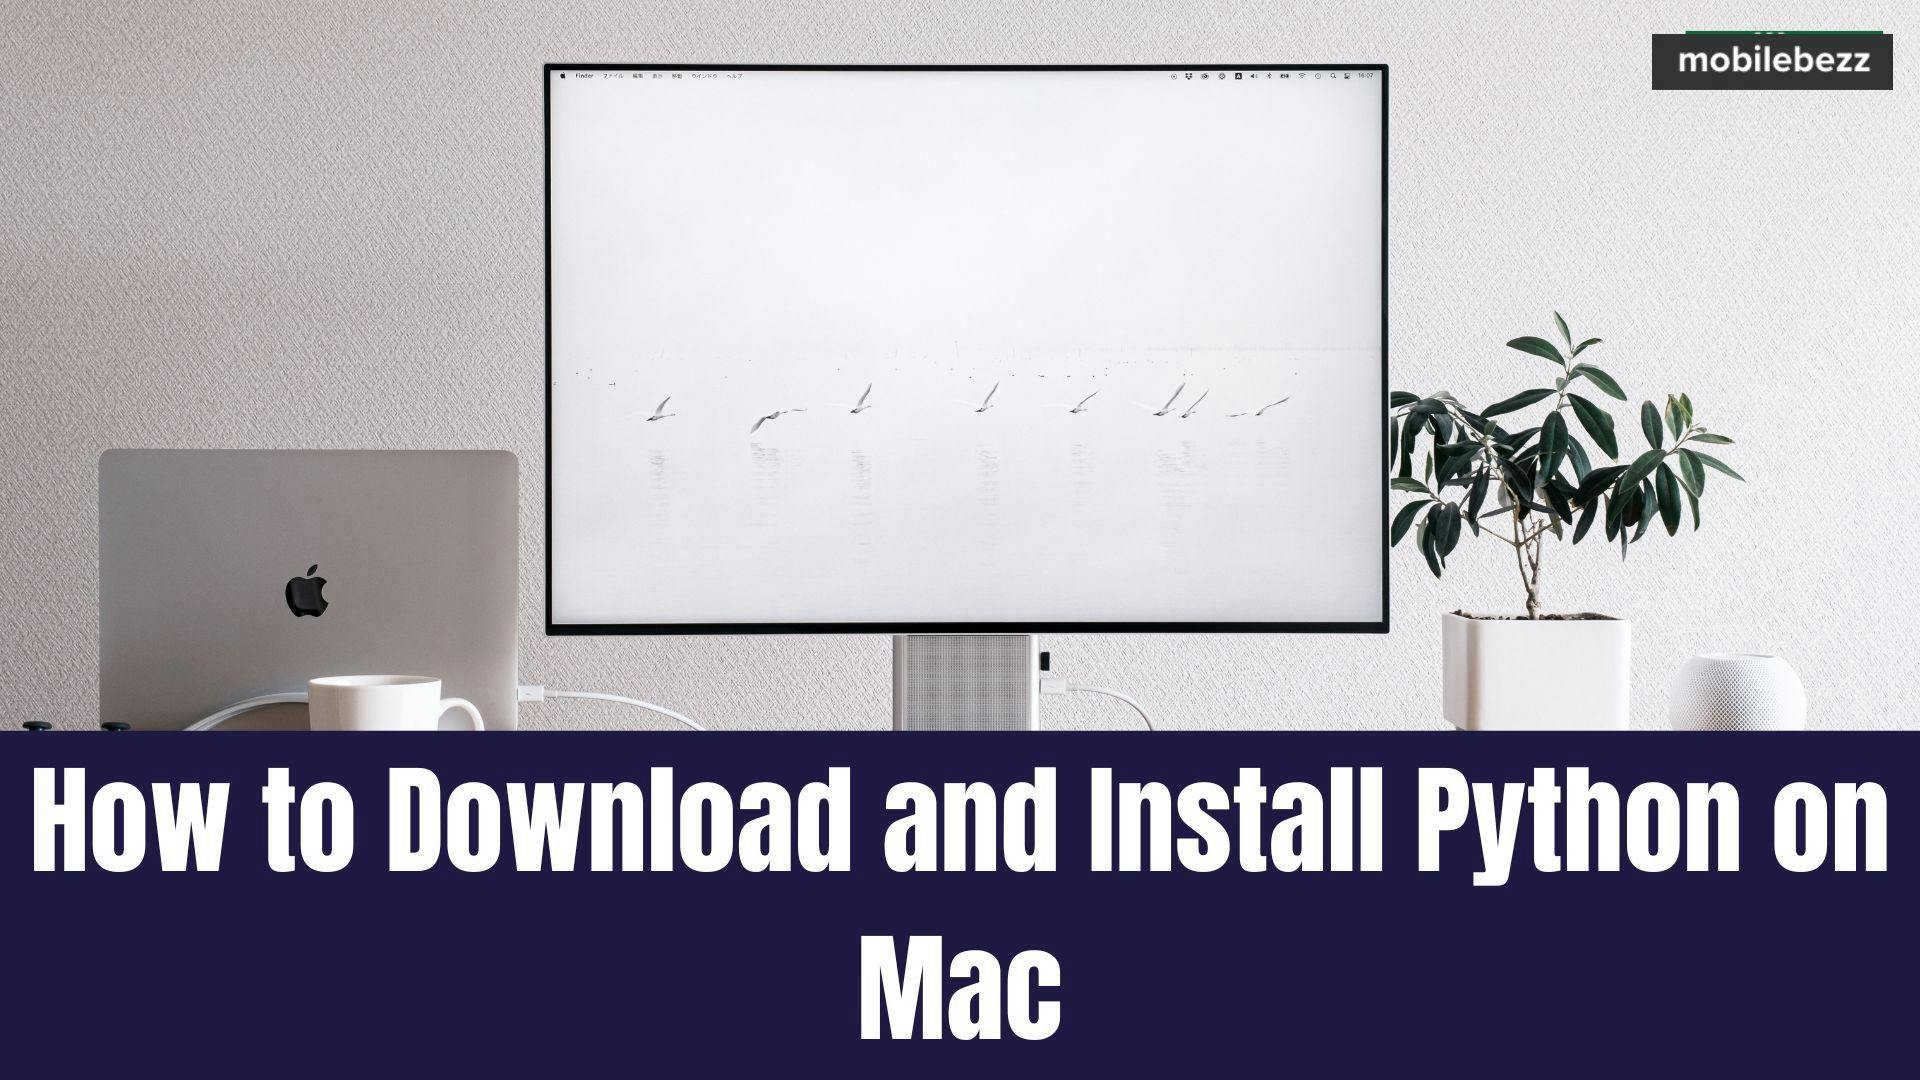 How to Download and Install Python on Mac featured image 